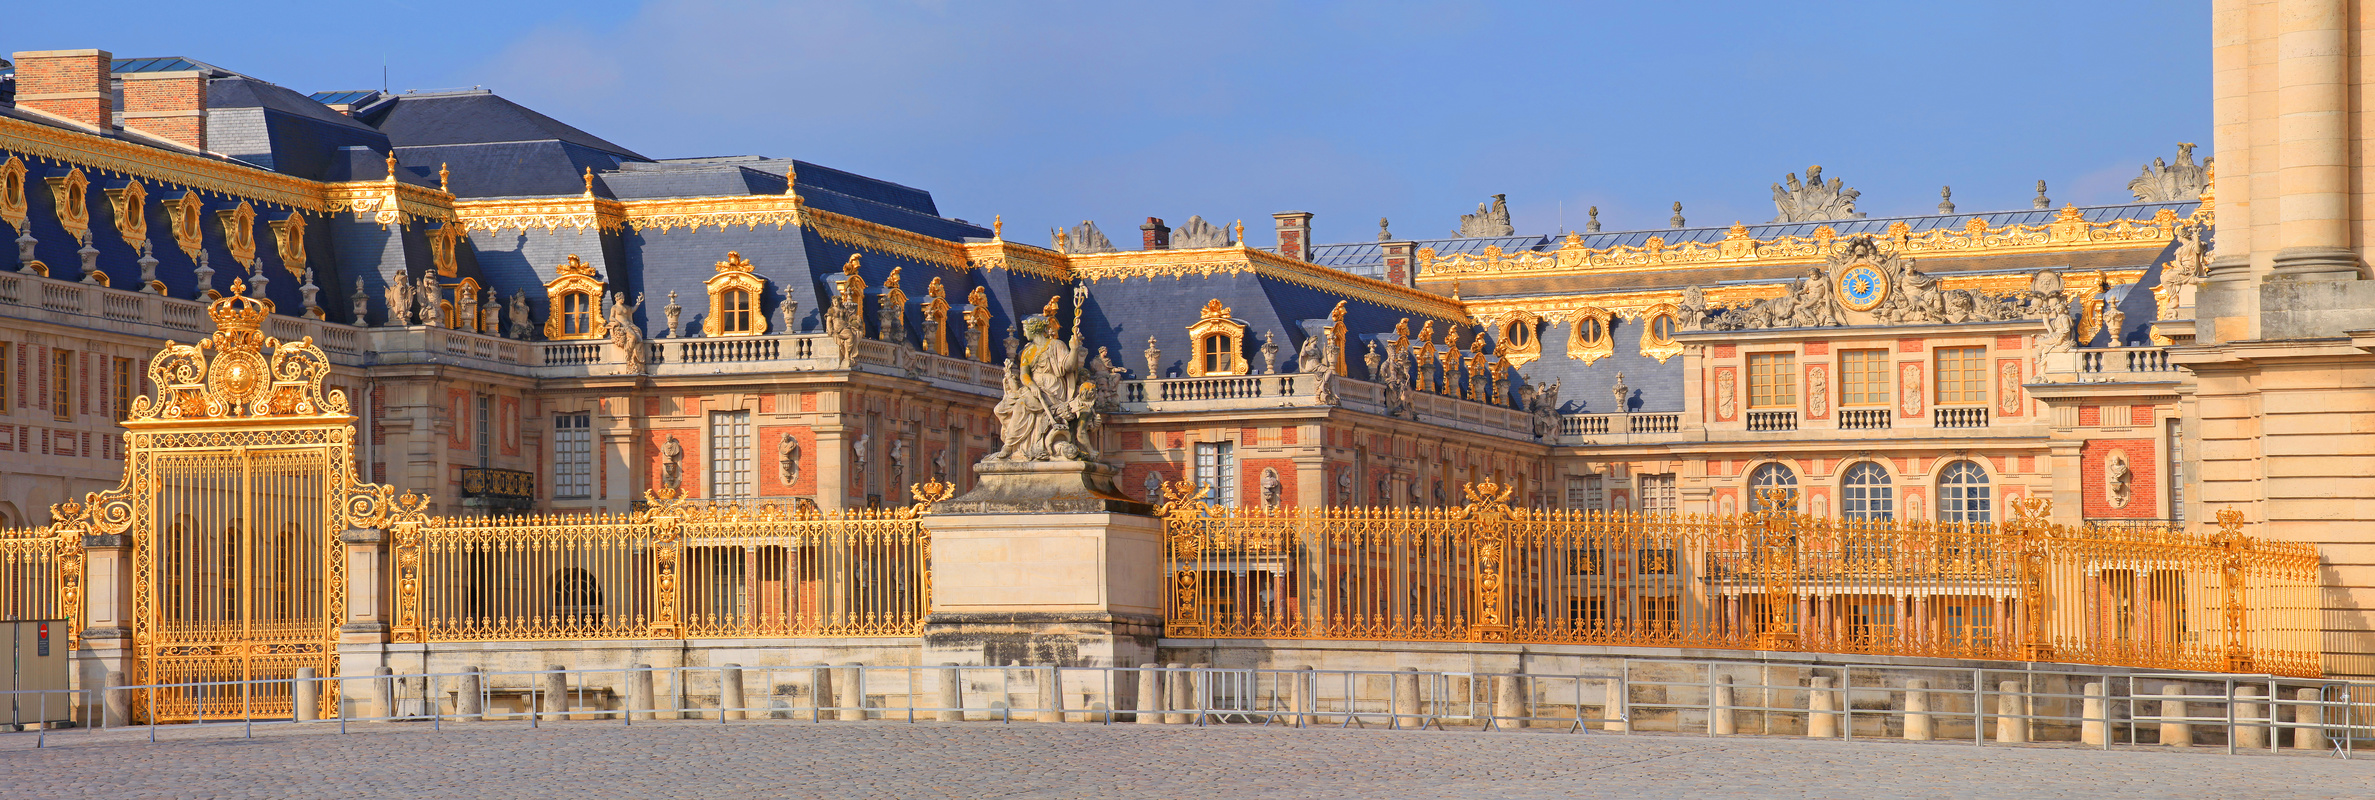 Palace of Versailles (front)